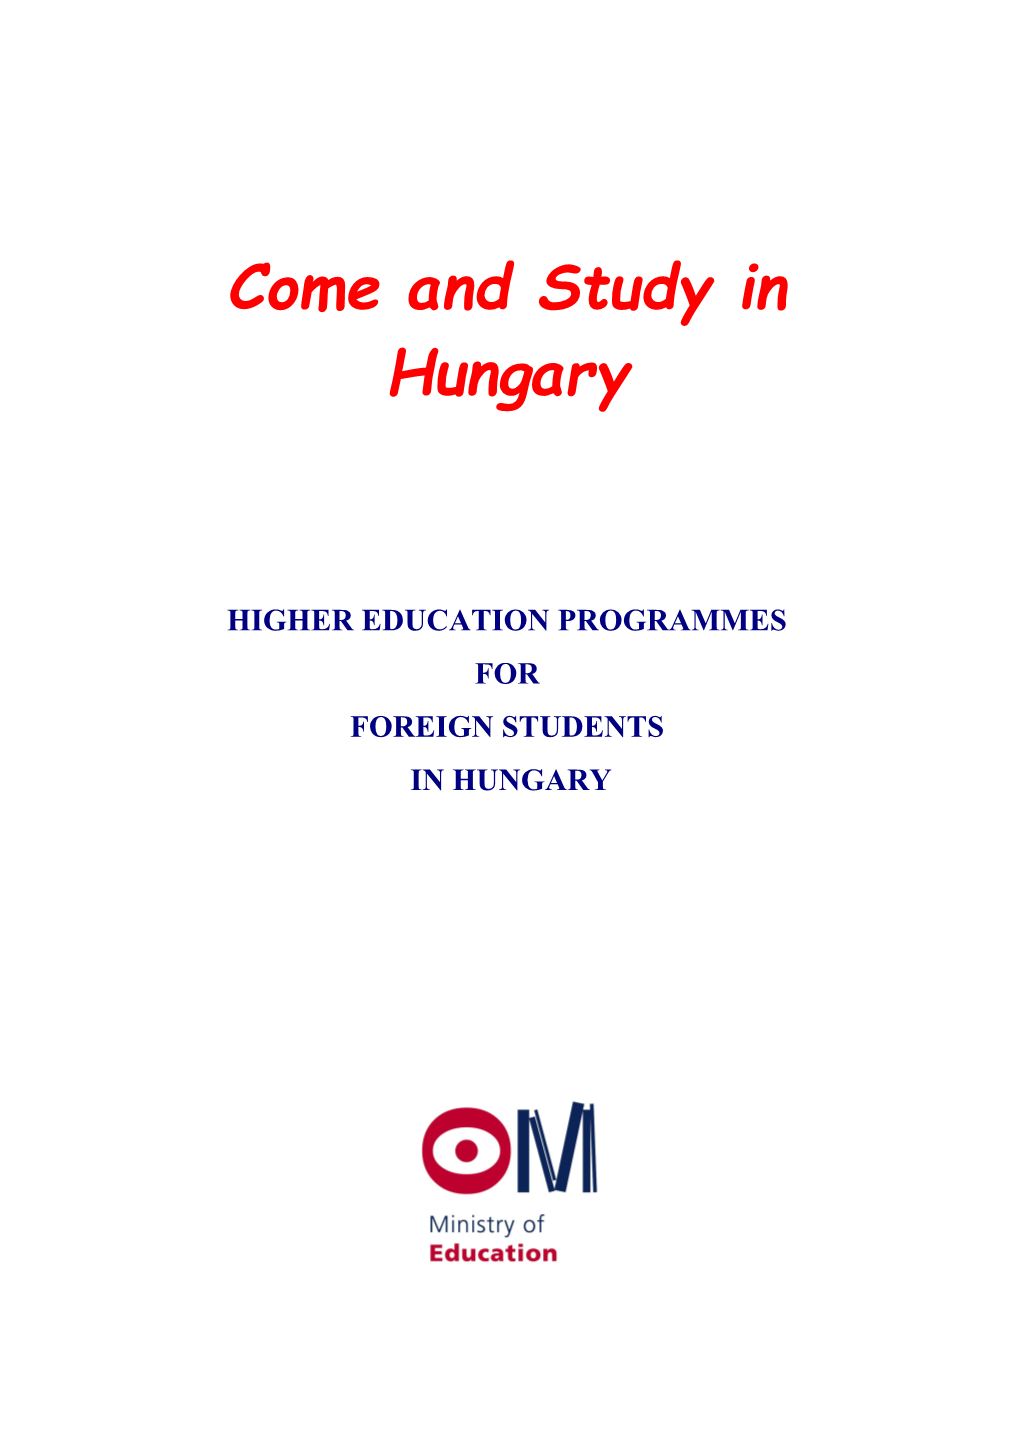 Come and Study in Hungary